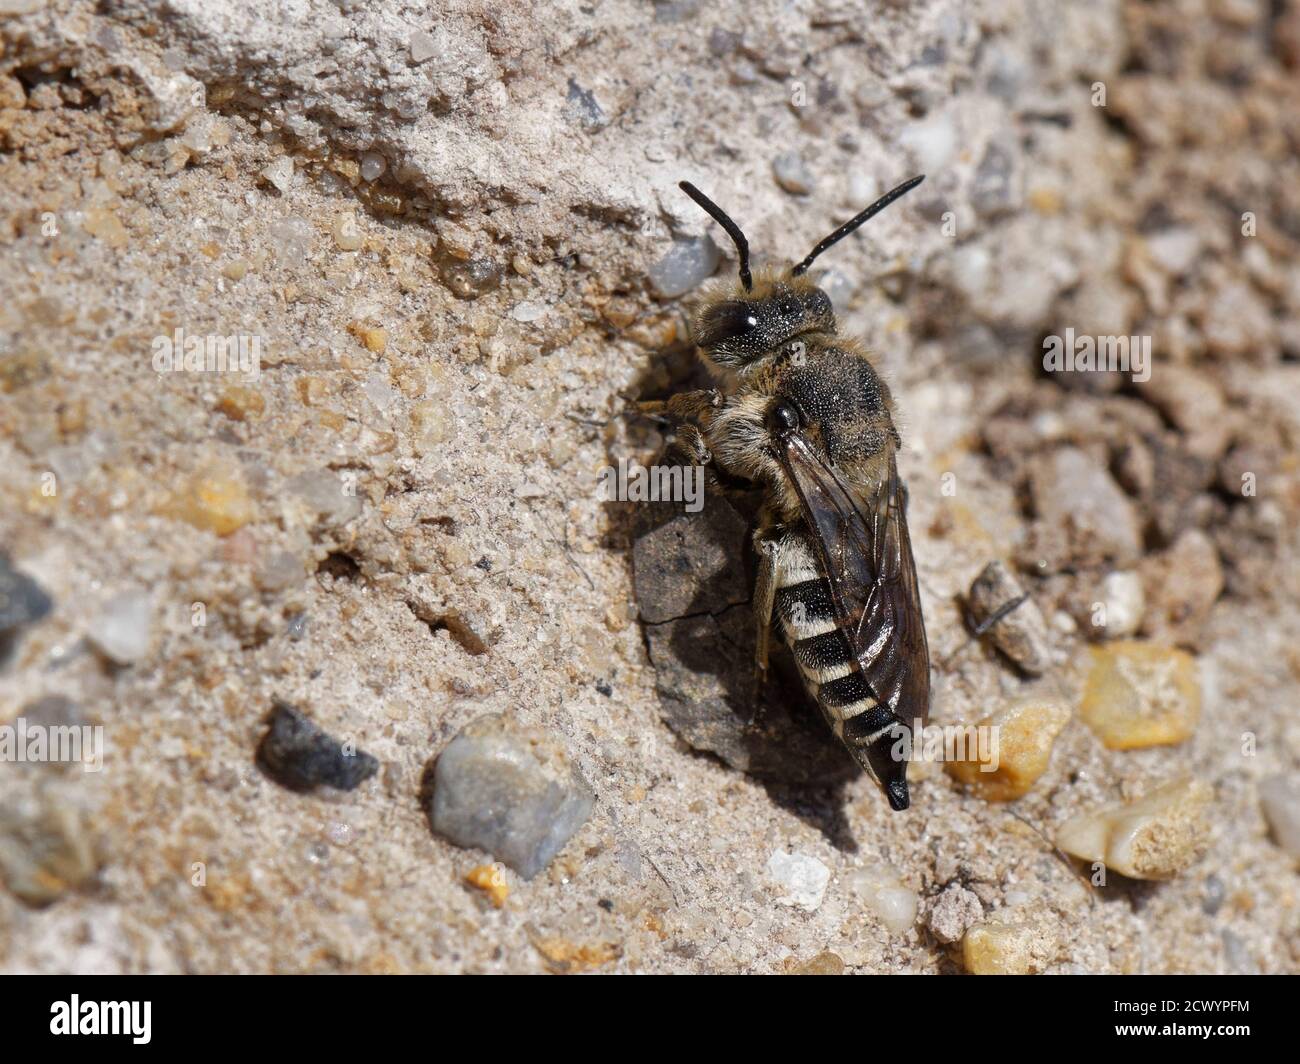 Rufescent sharp-tailed bee (Coelioxys rufescens) resting on a sandy bank near a colony of Green-eyed flower bees (Anthophora bimacuata) a host species Stock Photo